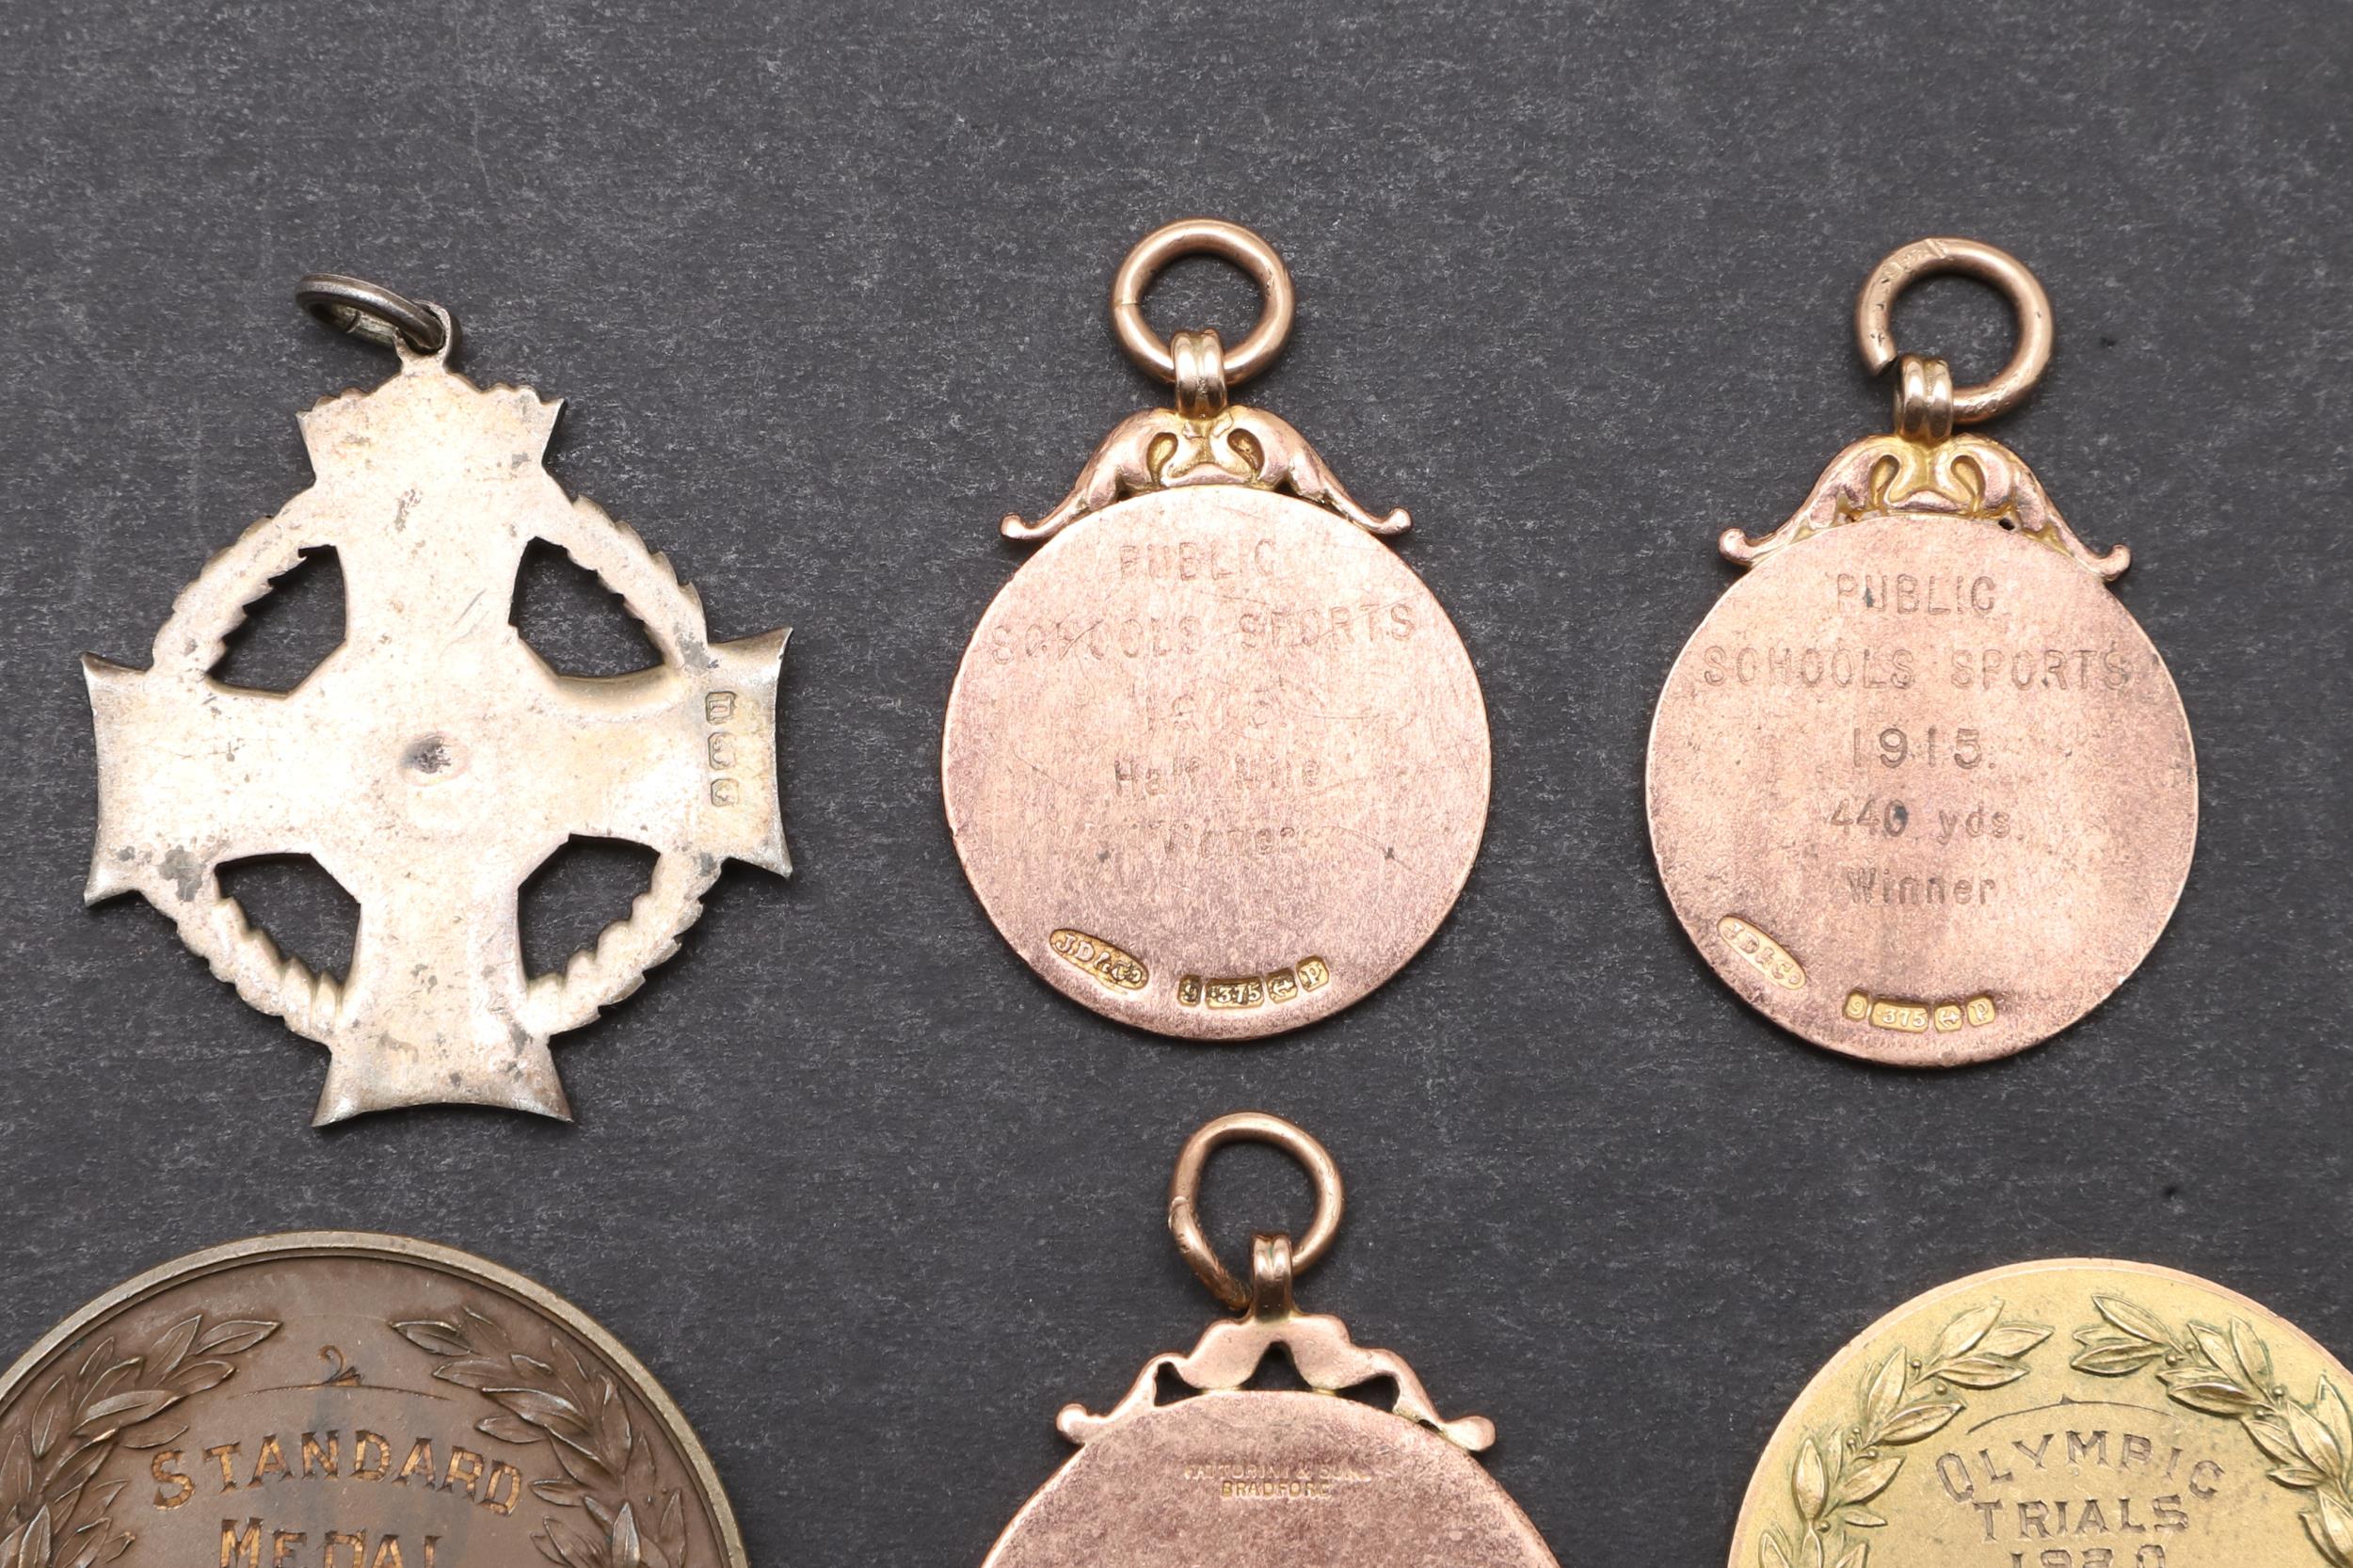 A COLLECTION OF GOLD AND SILVER SPORTING MEDALS TO INCLUDE A 1920'S OLYMPIC TRIALS MEDAL. - Image 6 of 8